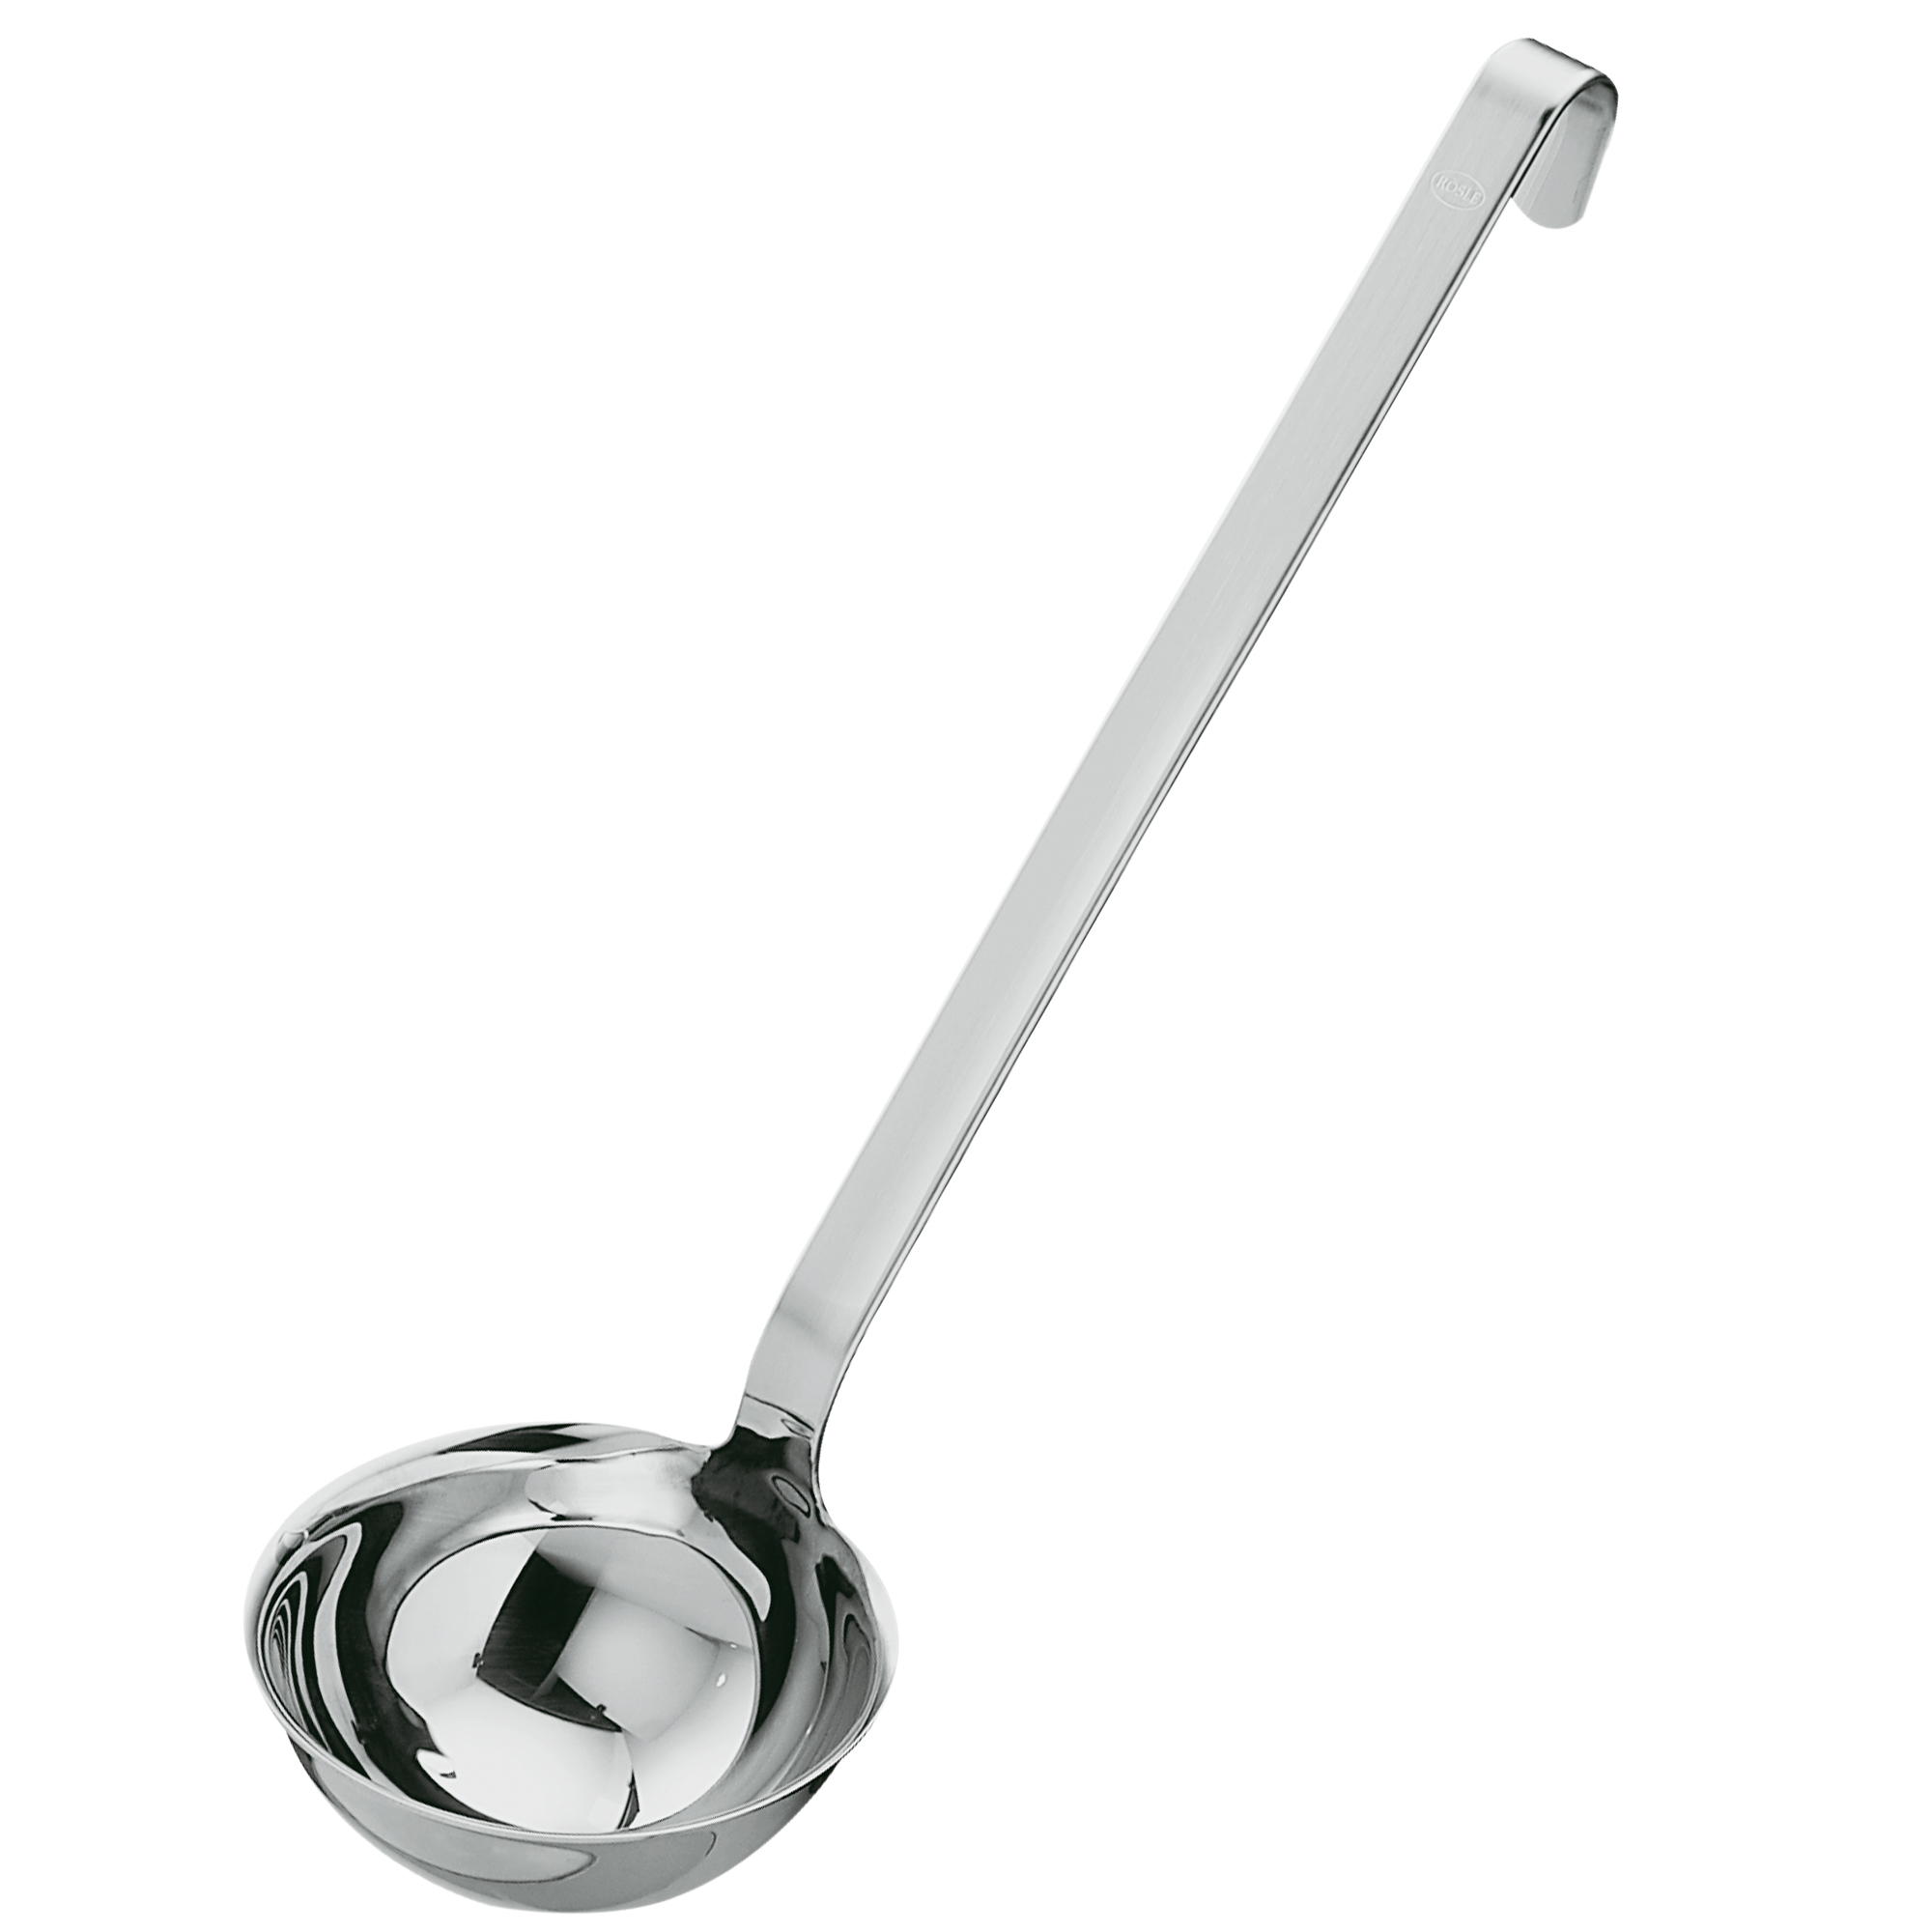 Hook Ladle with pouring rim Ø 10 cm|3.9 in.